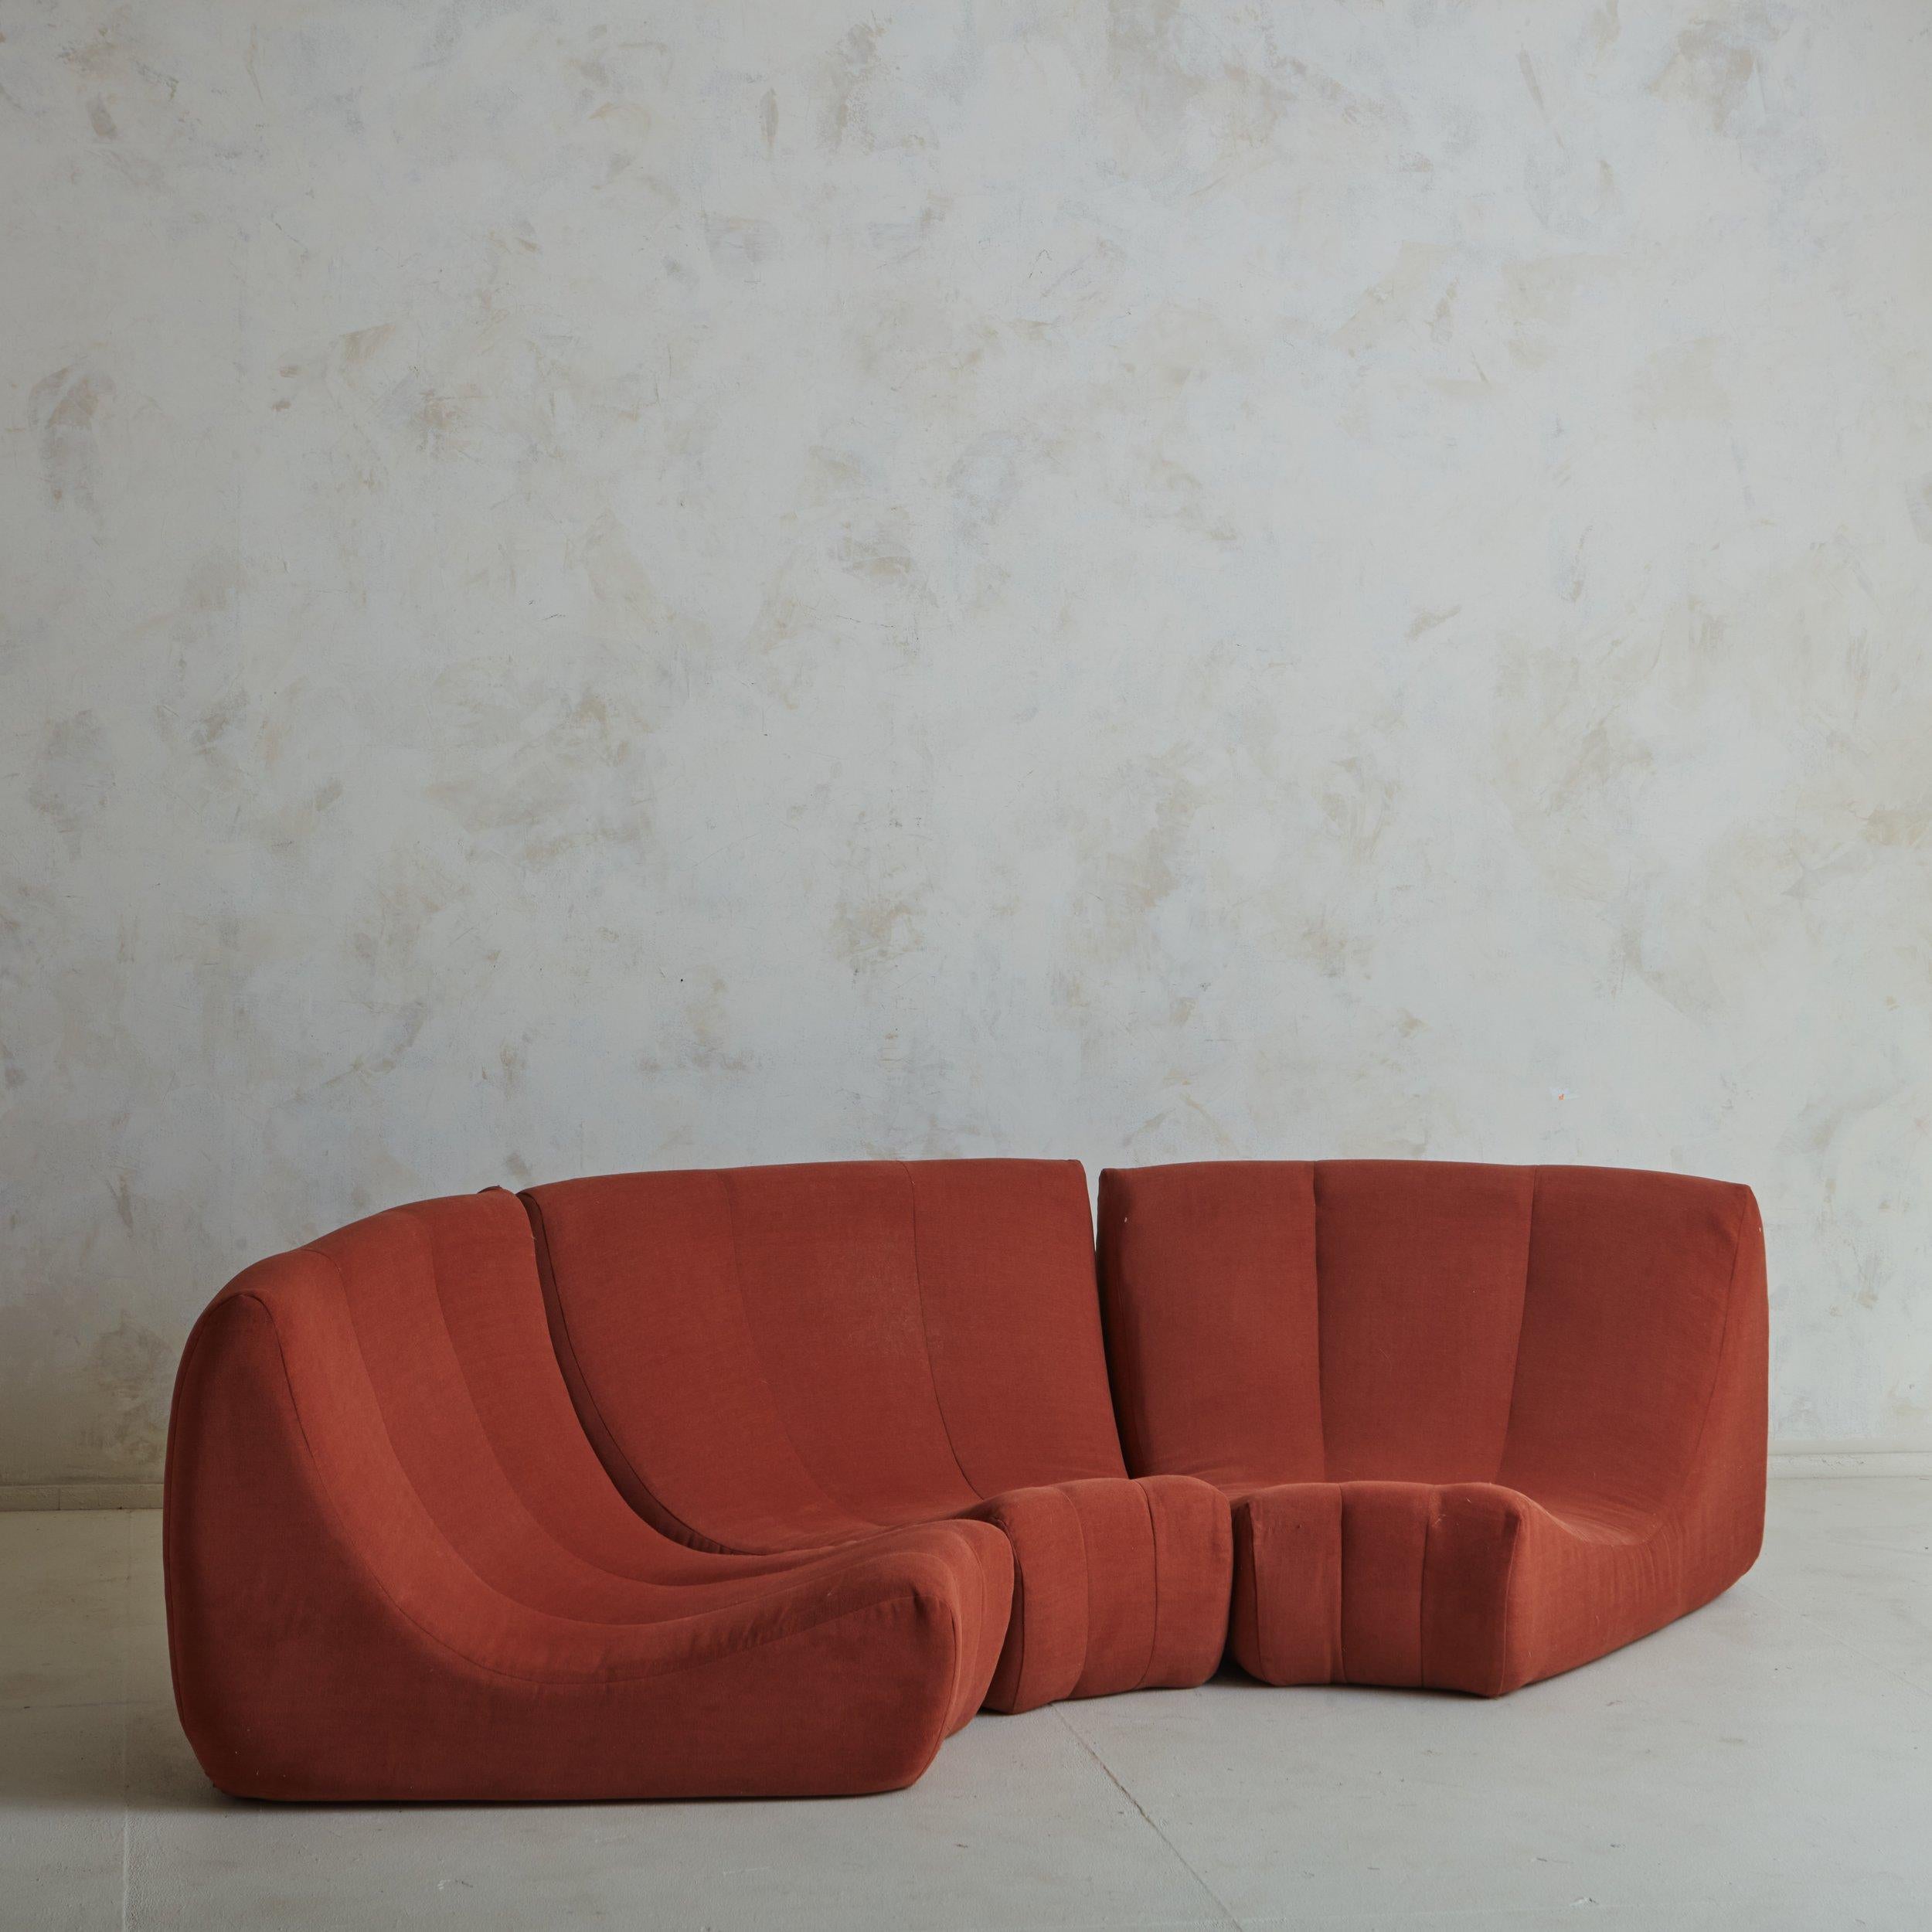 A French ‘Gilda’ sofa designed by Michel Ducaroy for Ligne Roset in 1972. This piece is modular; when the curved units are aligned, it creates a circle. This ‘Gilda’ sofa includes three sections in original coral ref fabric. The sections can stand